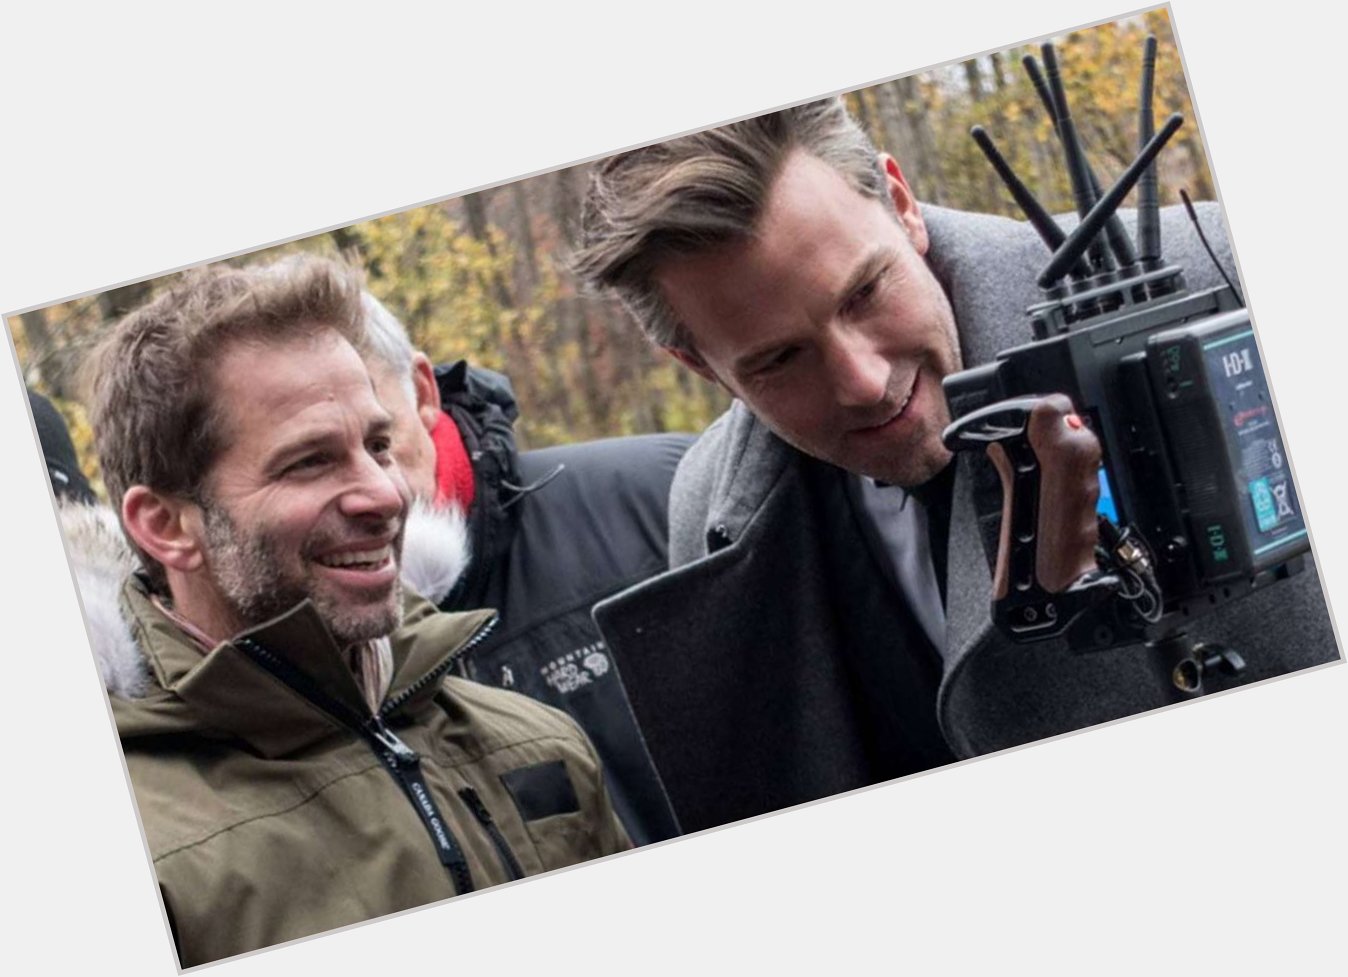 Happy birthday to Zack Snyder, one of the nicest directors in Hollywood :) 